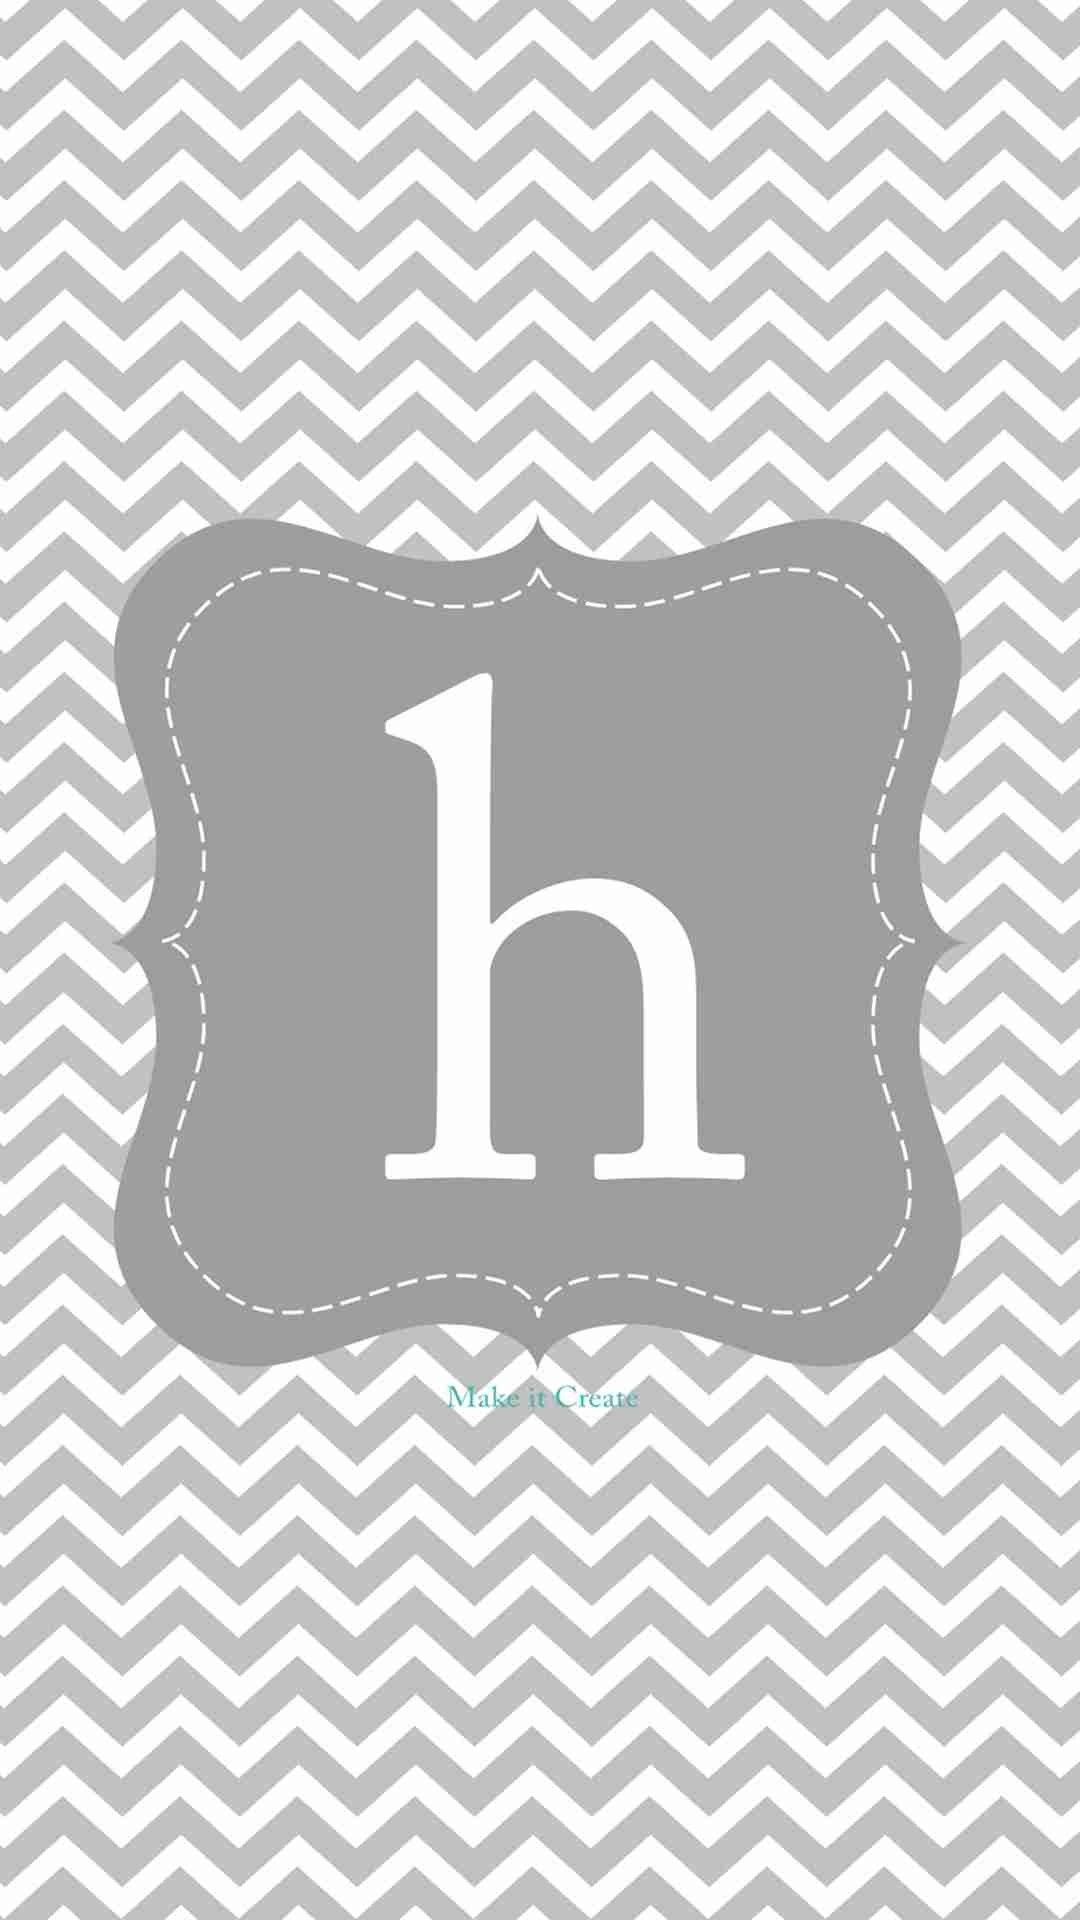 Monogram H Grey Square Chevron Iphone 6 Plus Wallpaper - C With Pink Background - HD Wallpaper 